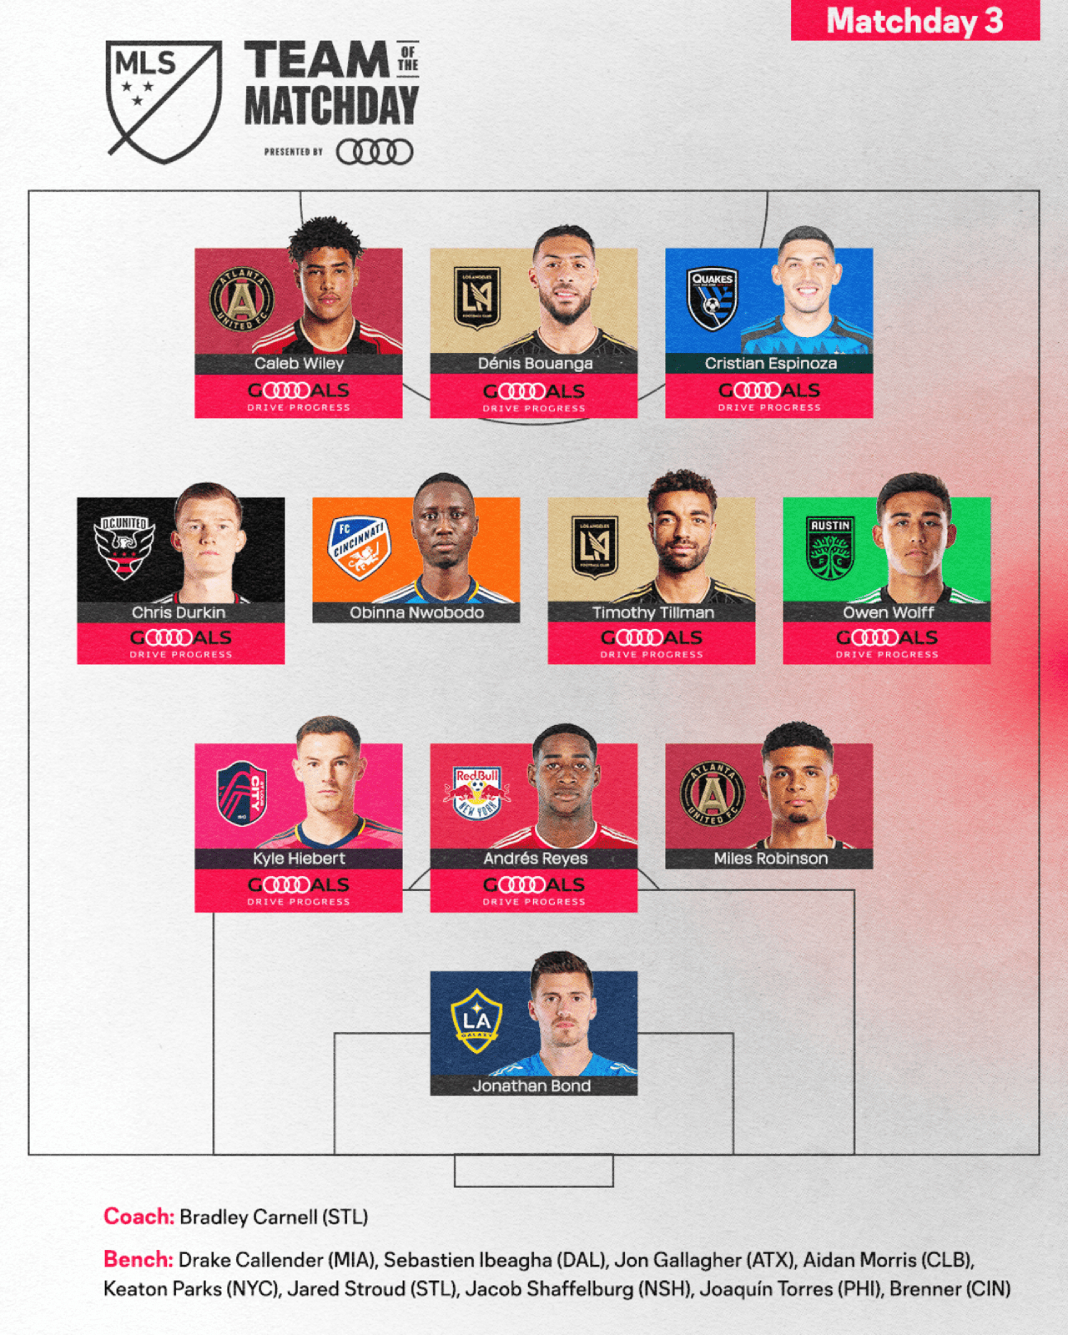 Team of the Matchday 3